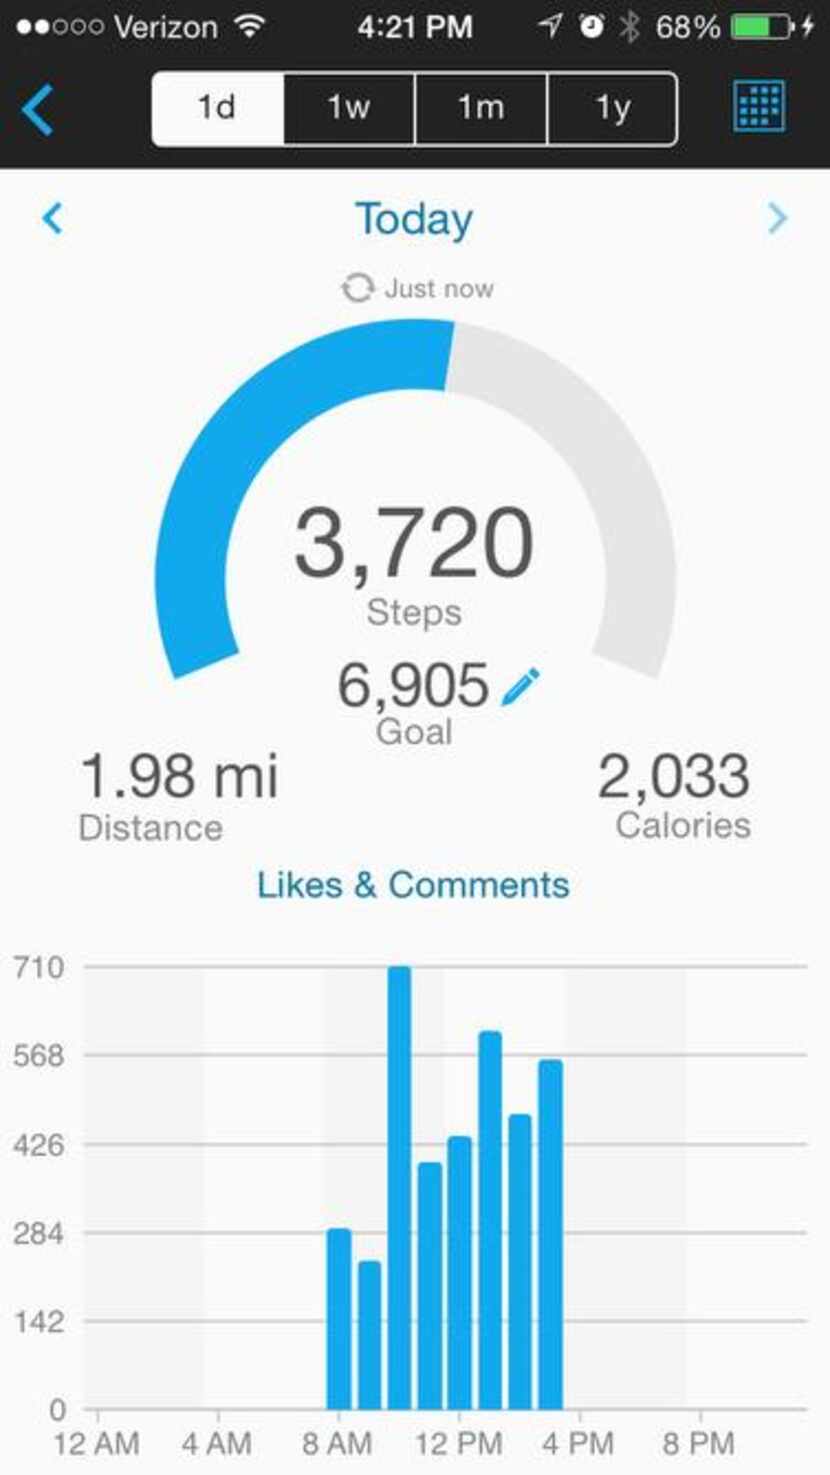 
The Garmin Vivofit sets a goal for how many steps to take during a day based on what you...